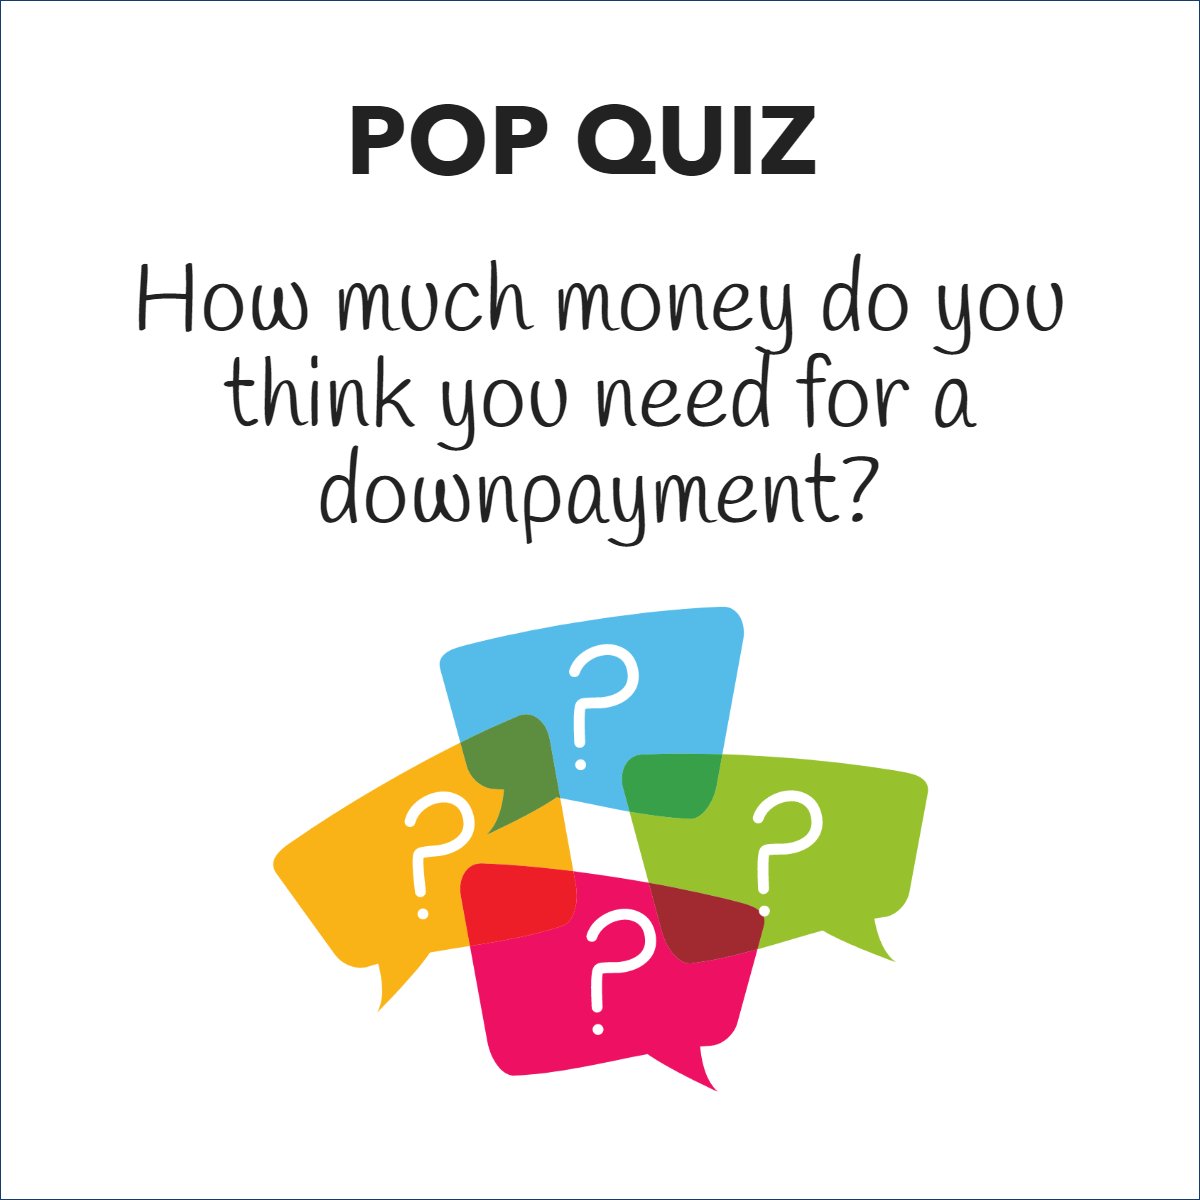 Fast Fact:

While a 20% down payment was once the standard, many homebuyers now pay 5% or less. 💰

#realestate #realestatetips #downpayment #downpaymentassistance #popquiz #realestate101
 #myhousefl #realestate #Floridarealestate #sellyourhouse #buyyourhome